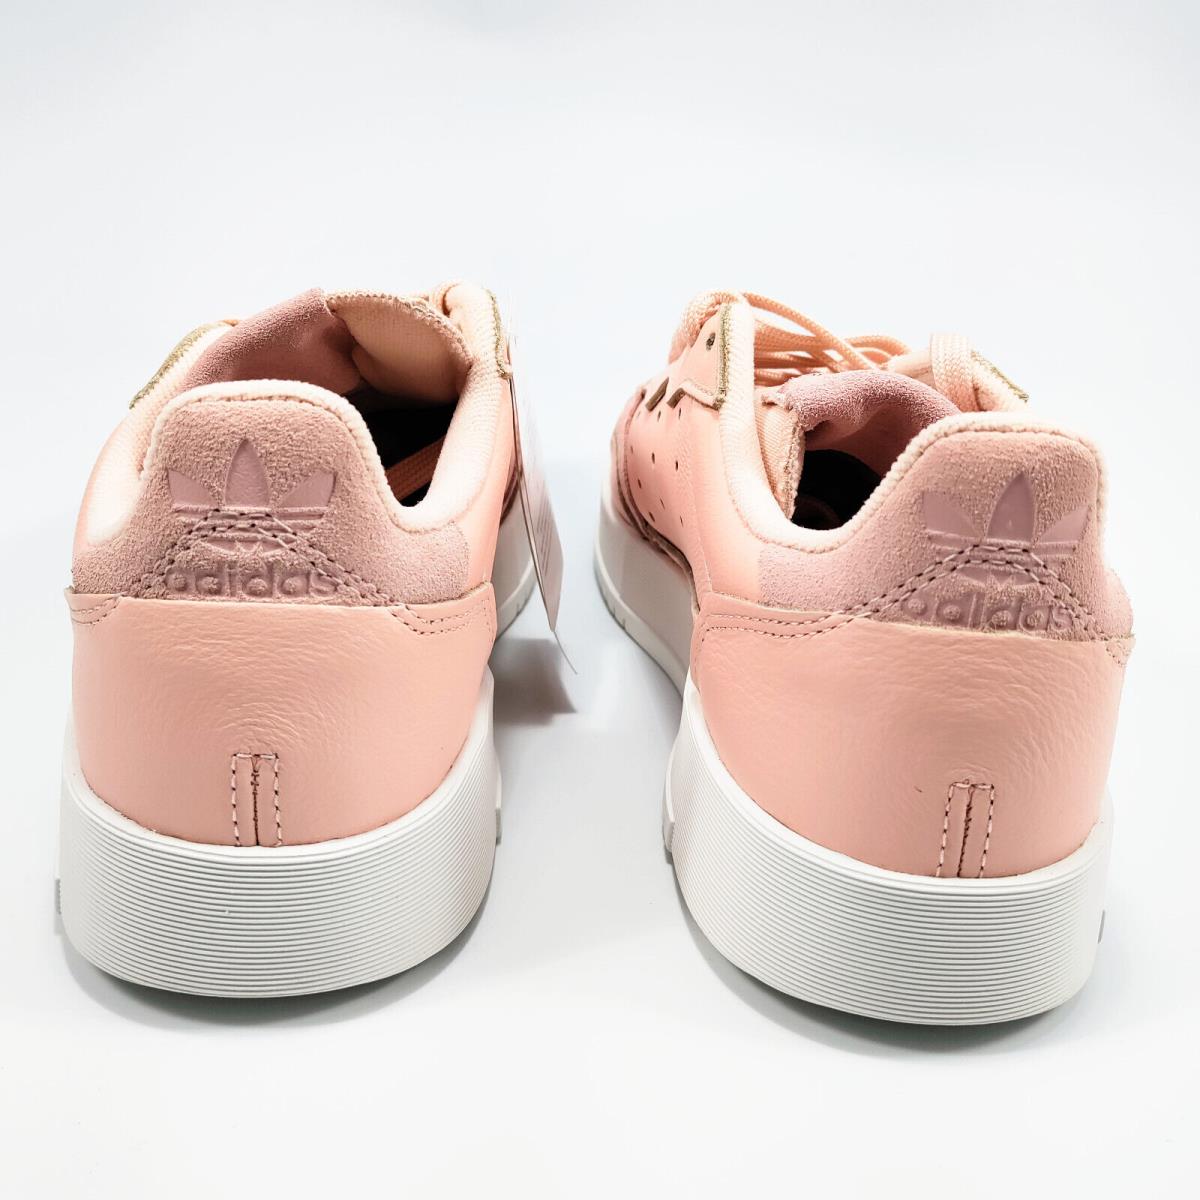 Adidas shoes Revolution Racer - Pink 6